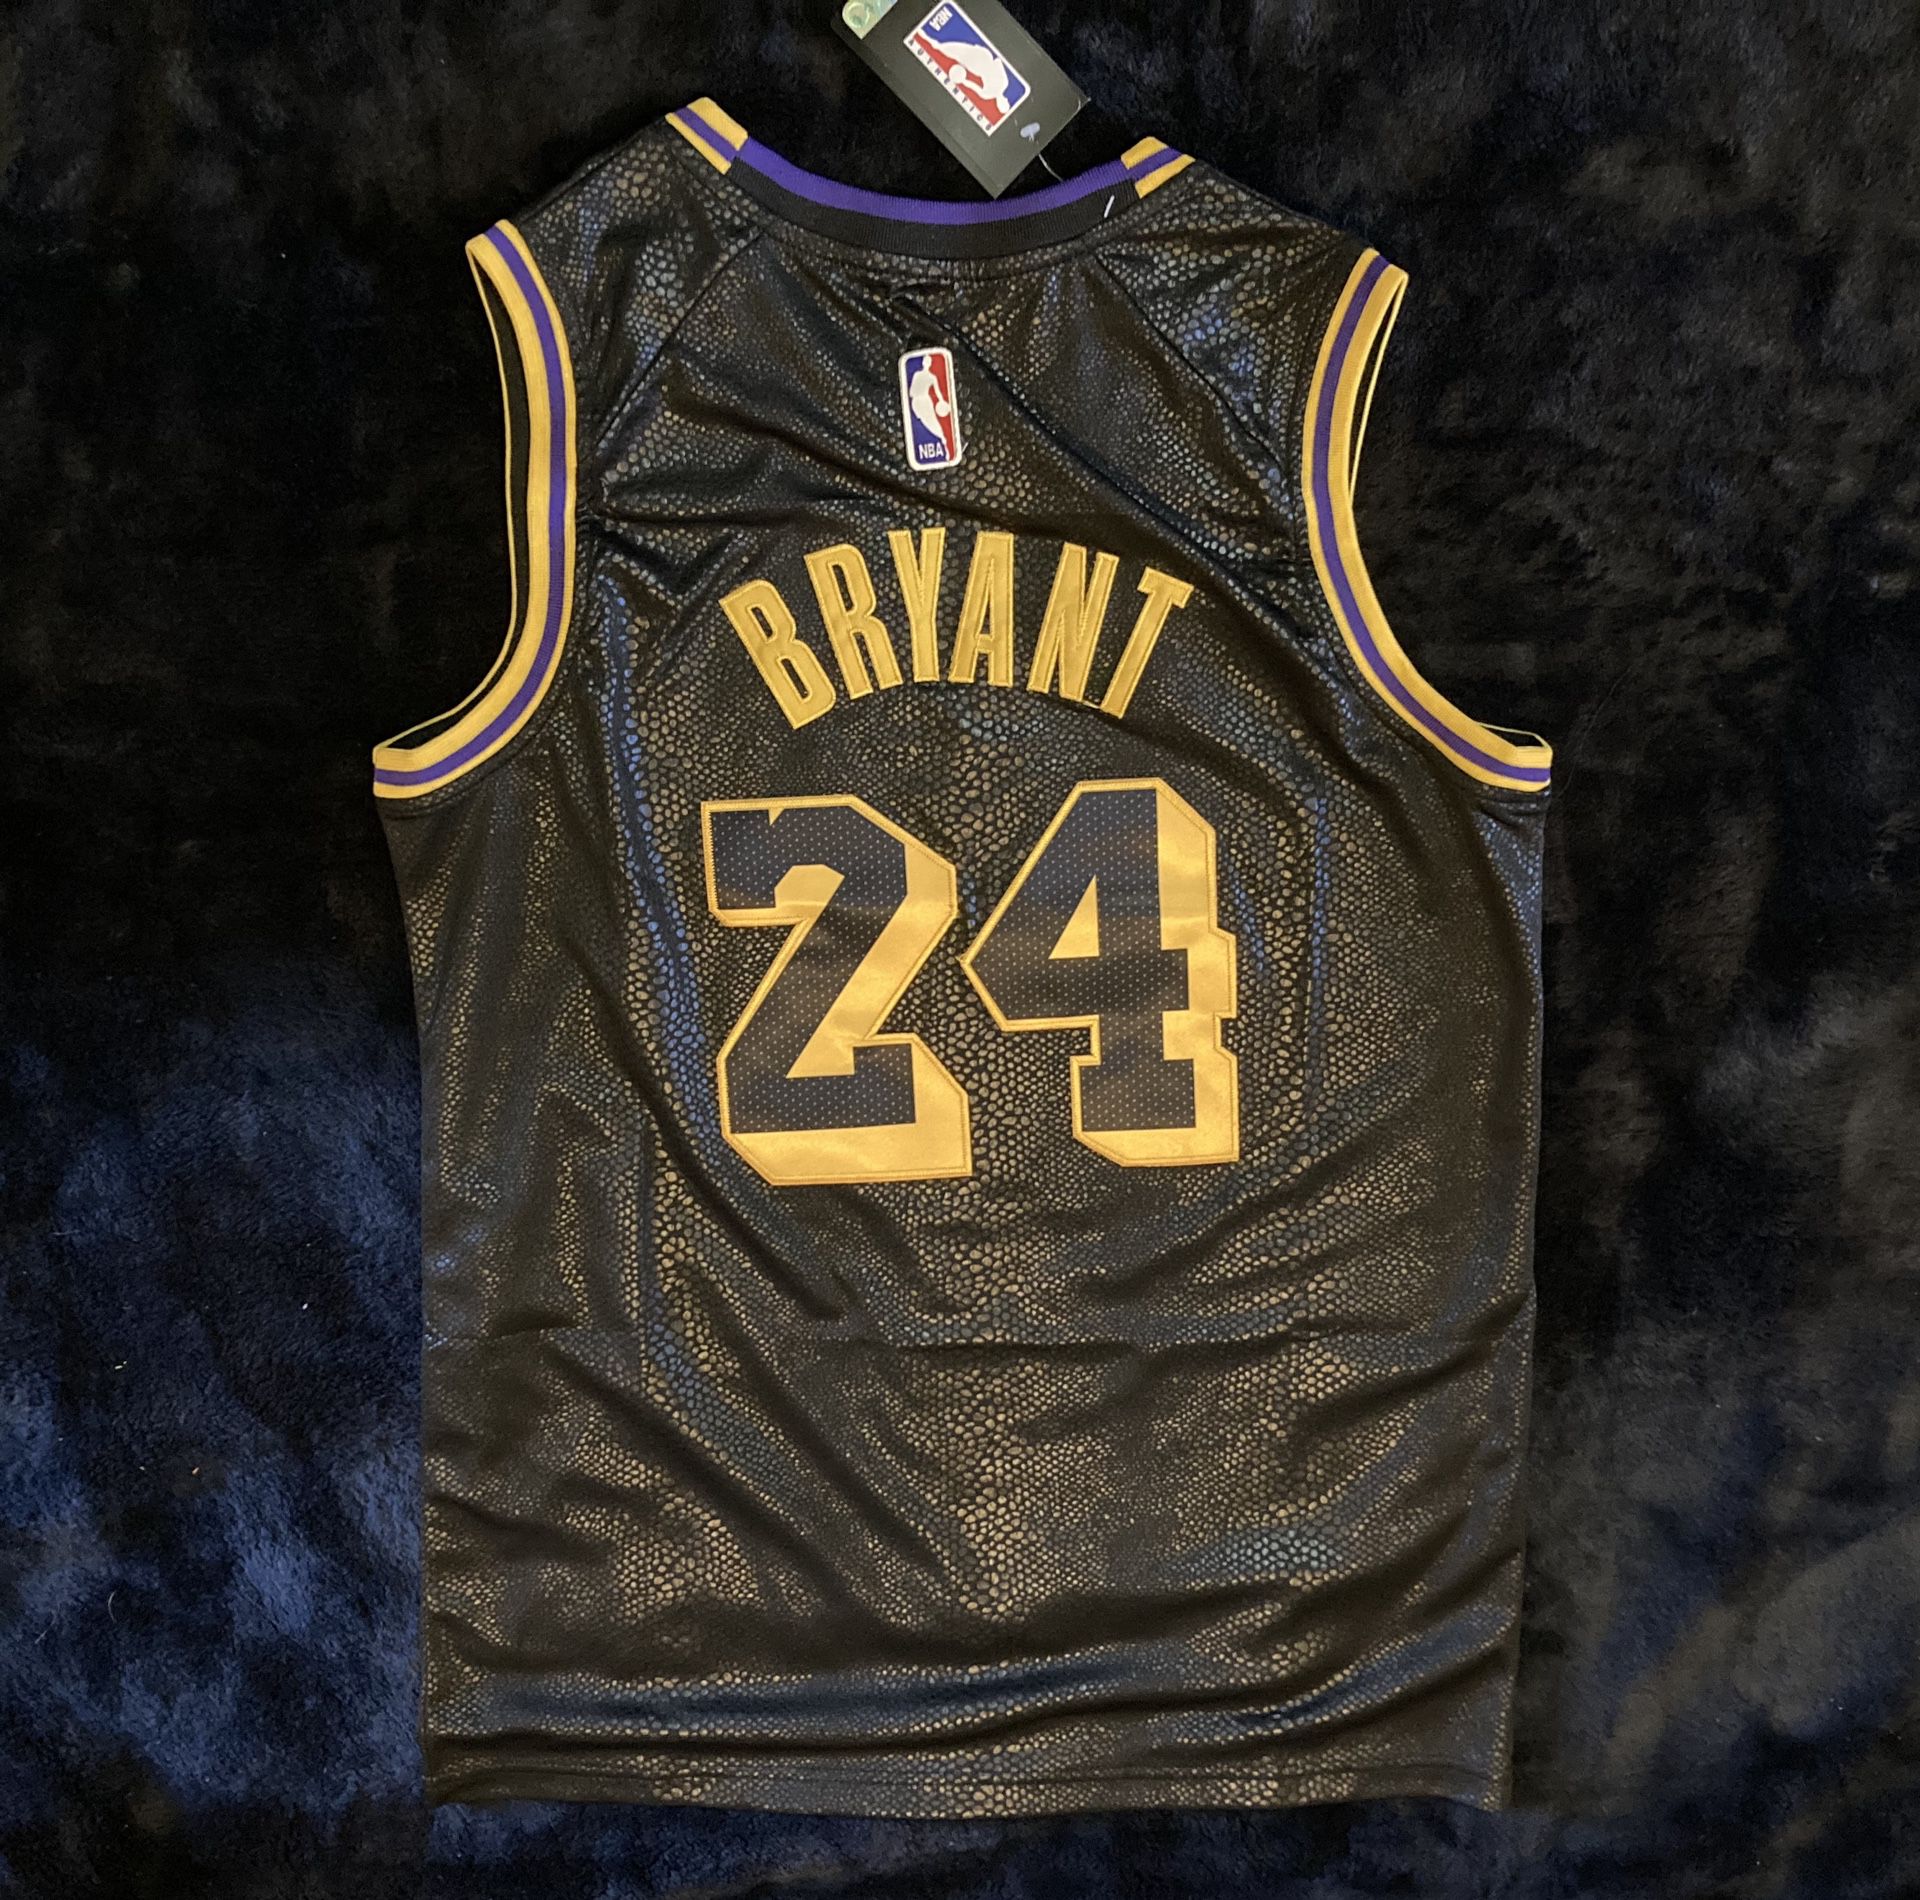 Lakers Jerseys for sale in Milpitas, California